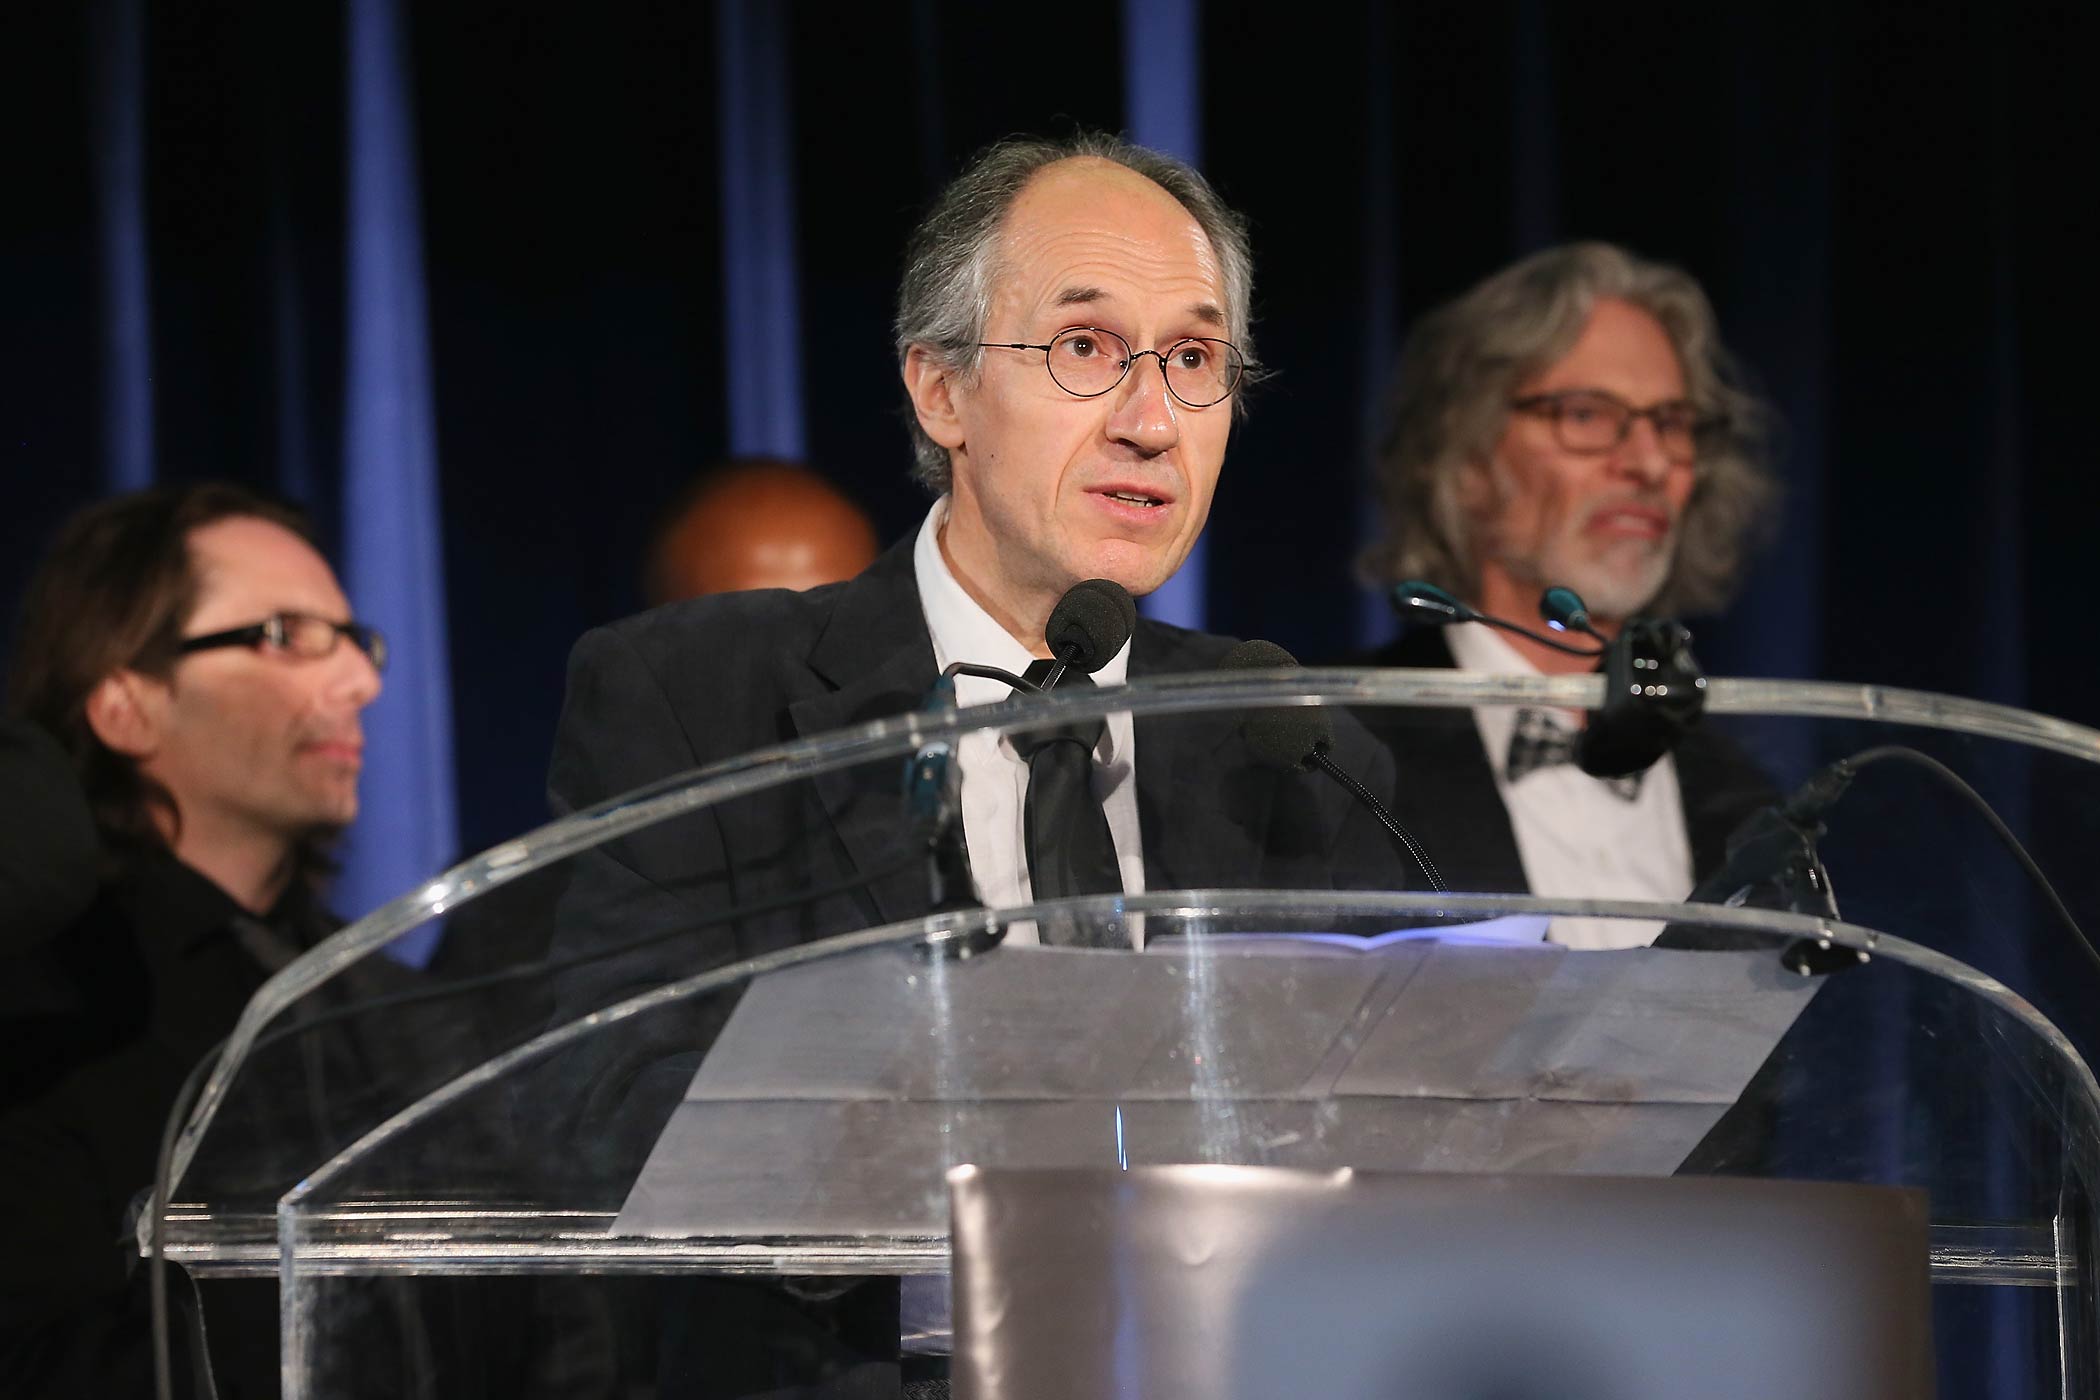 Charlie Hebdo editor-in-chief Gerard Biard accepts the PEN/Toni and James C. Goodale Freedom of Expression Courage Award onstage with Charlie Hebdo Film Critic Jean-Baptiste Thoret, left, and New York Cartoon Editor Bob Mankoff, right, at the PEN American Center Literary Gala at the American Museum of Natural History on May 5, 2015 in New York. (Jemal Countess—Getty Images)